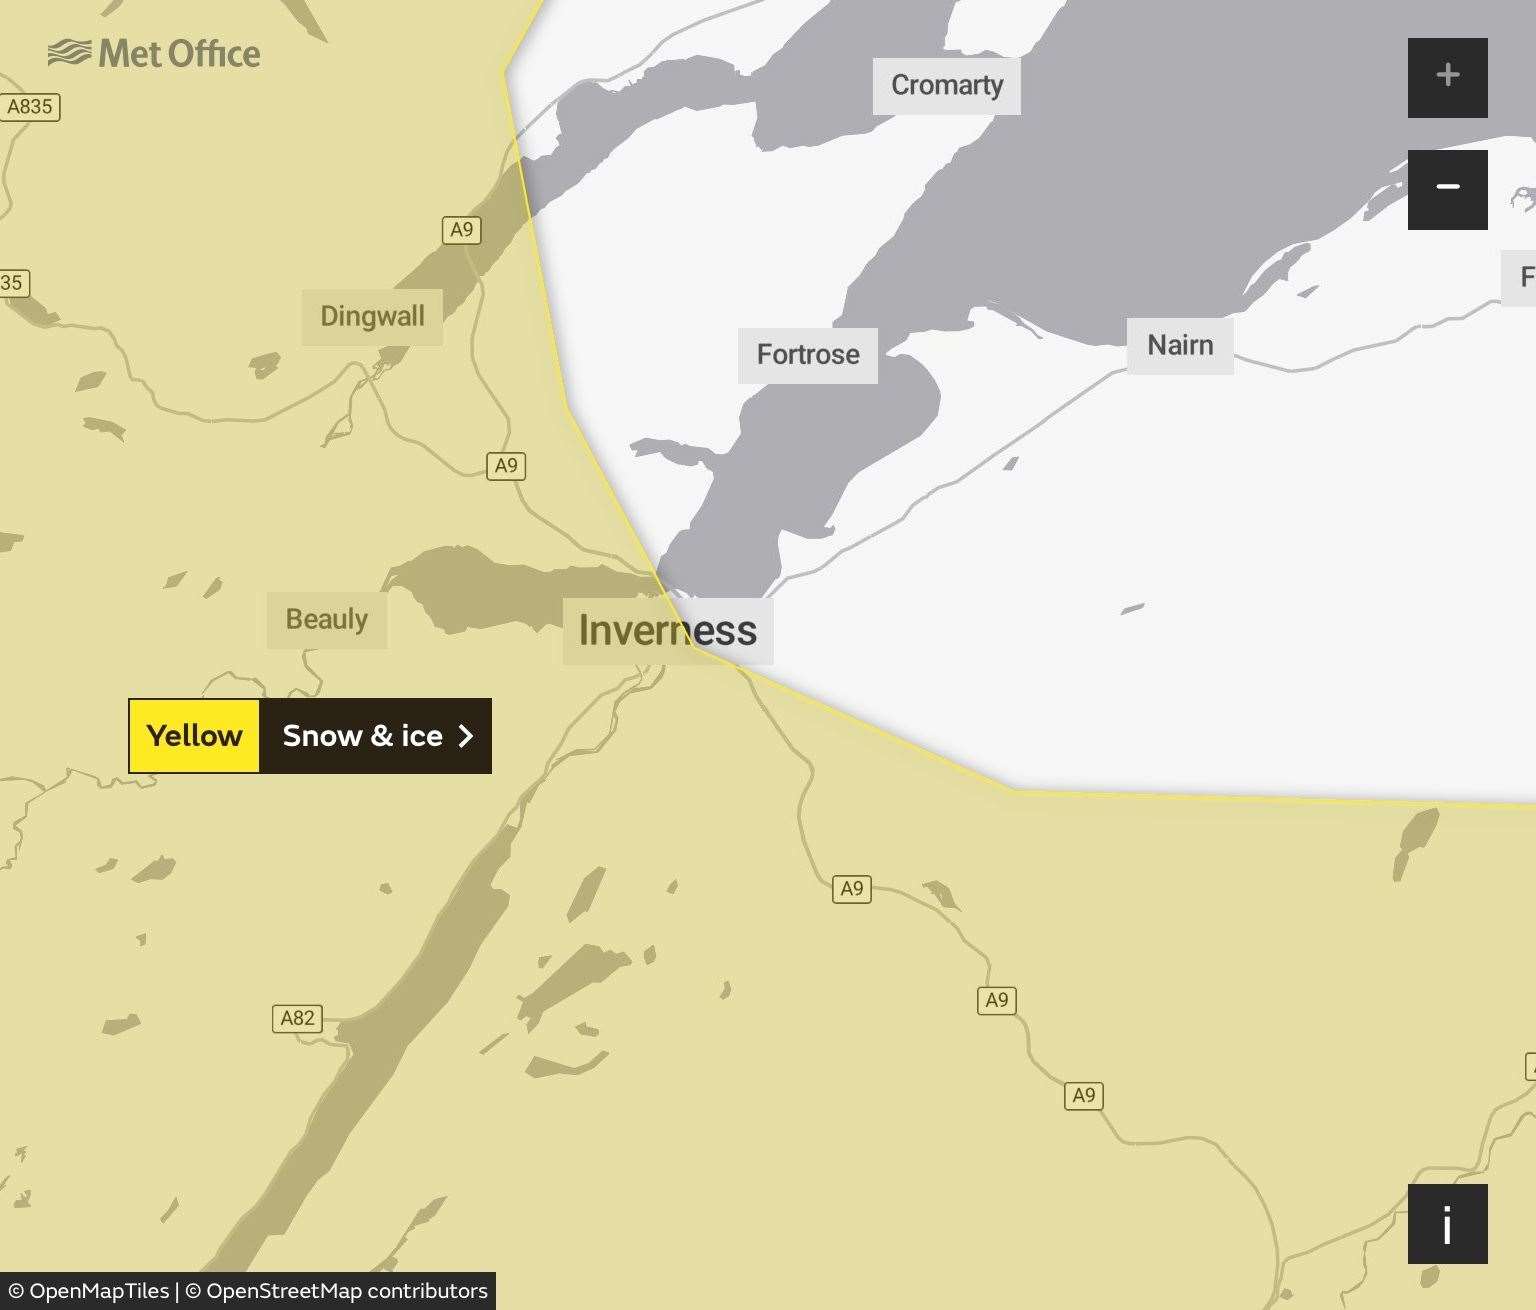 Inverness is on the edge of the warning area.